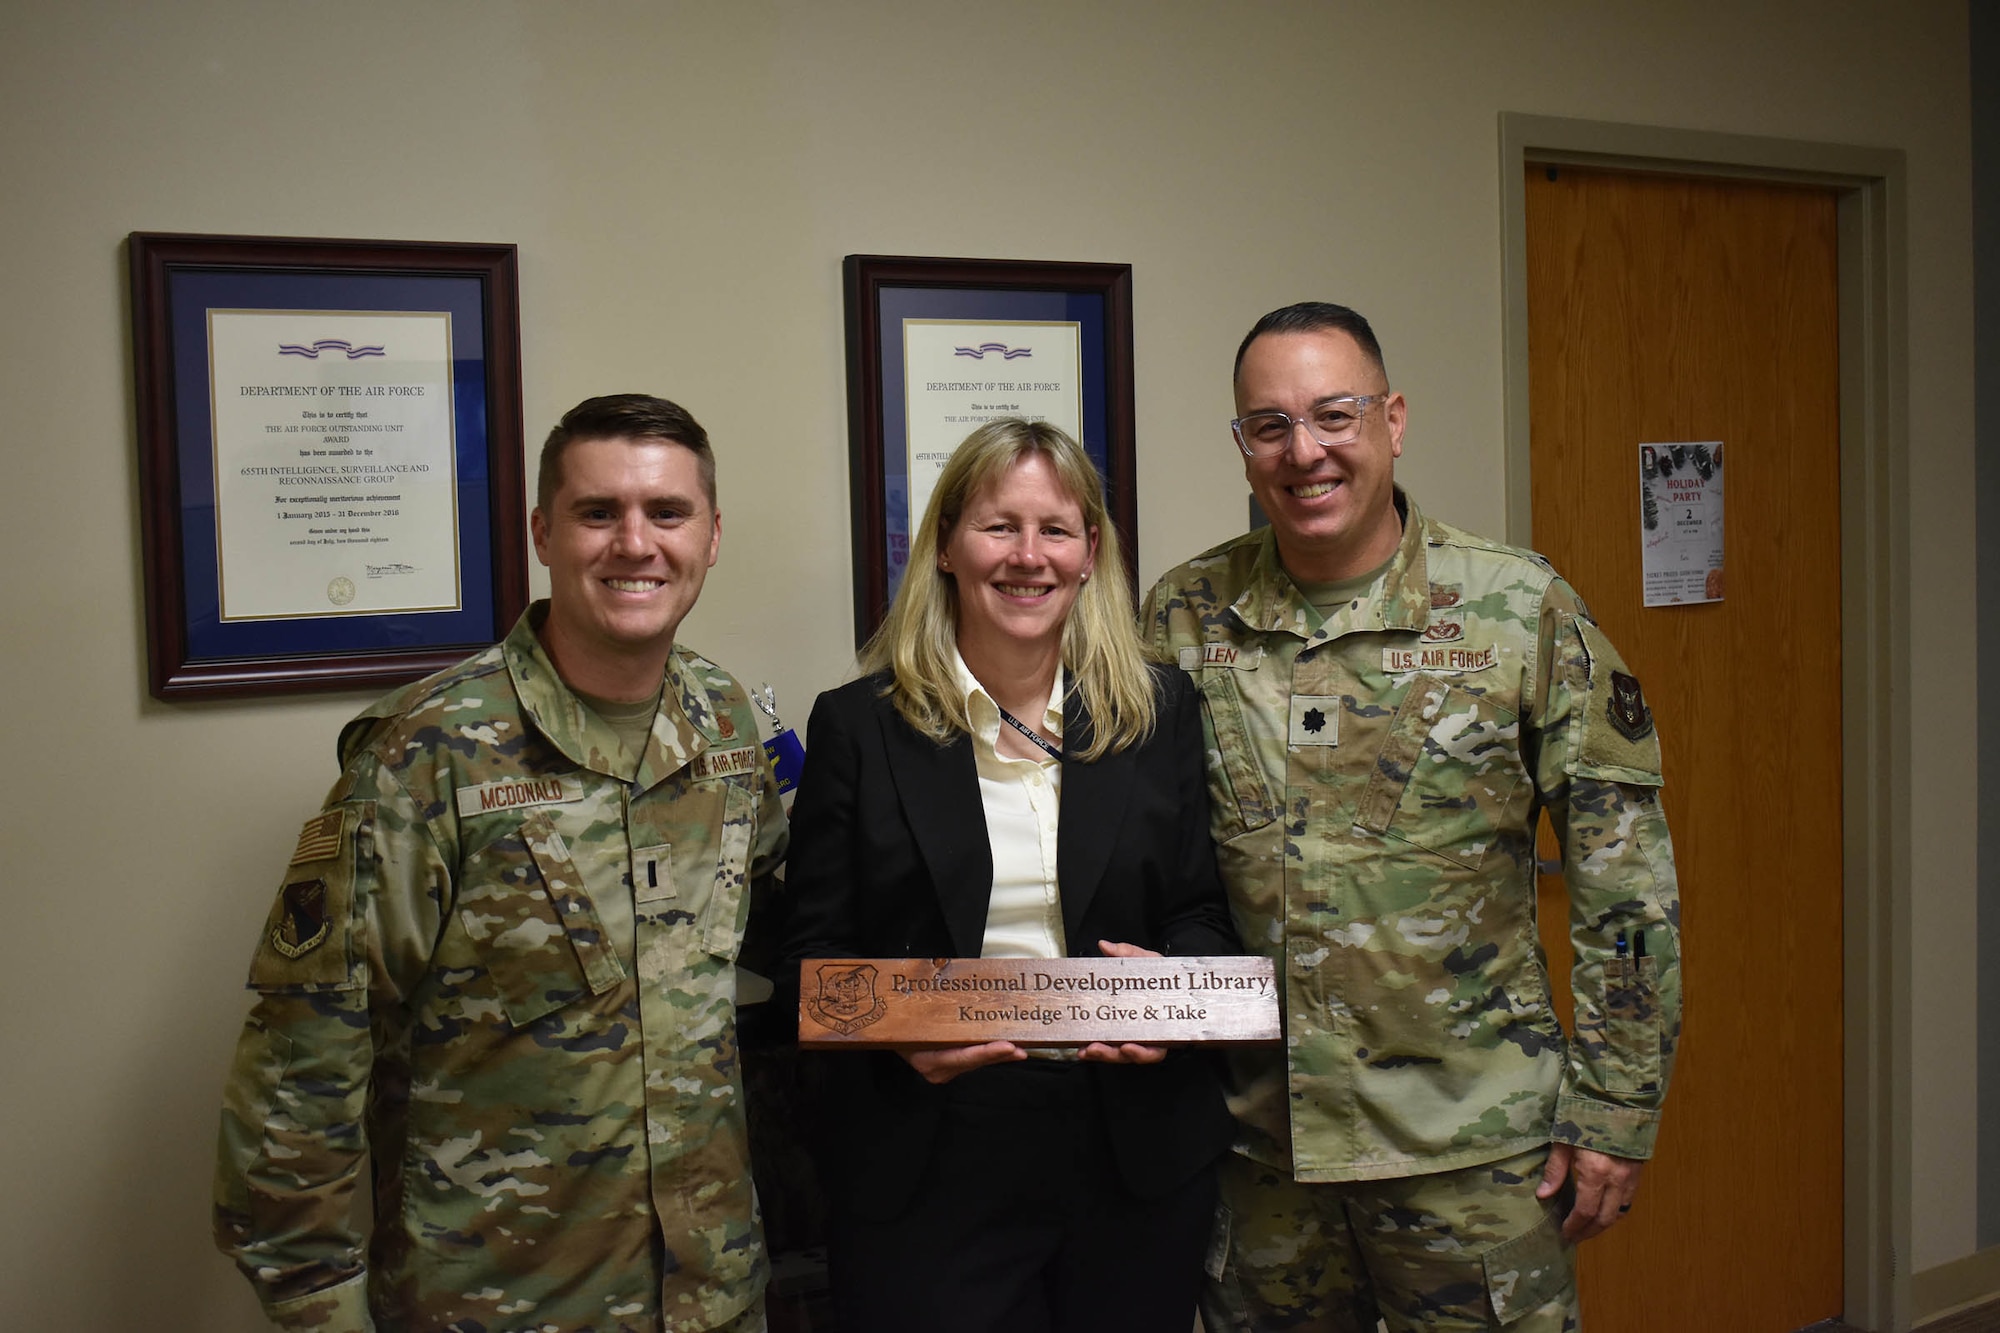 From left, 1st Lt. Matt McDonald, retired Lt. Col. Audrey Swinney and Lt. Col. Brent Allen – some of the original 655th Intelligence, Surveillance and Reconnaissance (ISR) Group members when the group stood up in 2013 – were honored as 655th ISRG “Plank Holders” on Nov. 3, 2023, at the 655th ISR Wing headquarters. The group named 16 members as plank holders when the group officially stood up in September 2013.